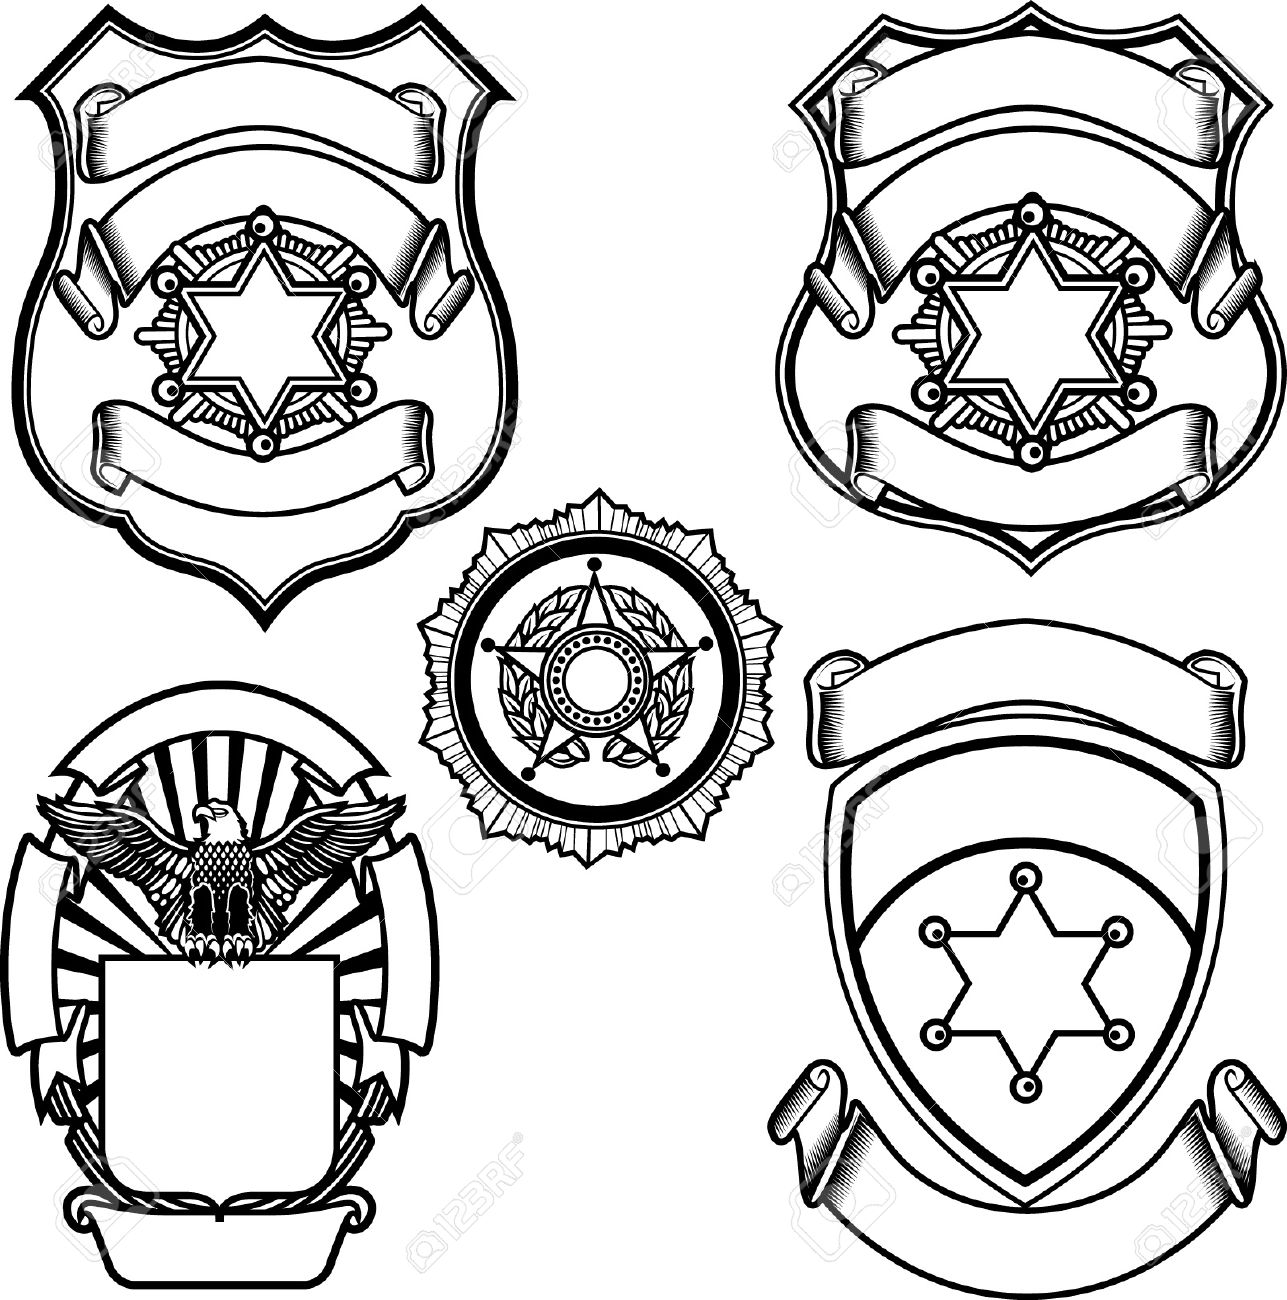 Police Badge Template Community Helpers Pinterest Fre - vrogue.co